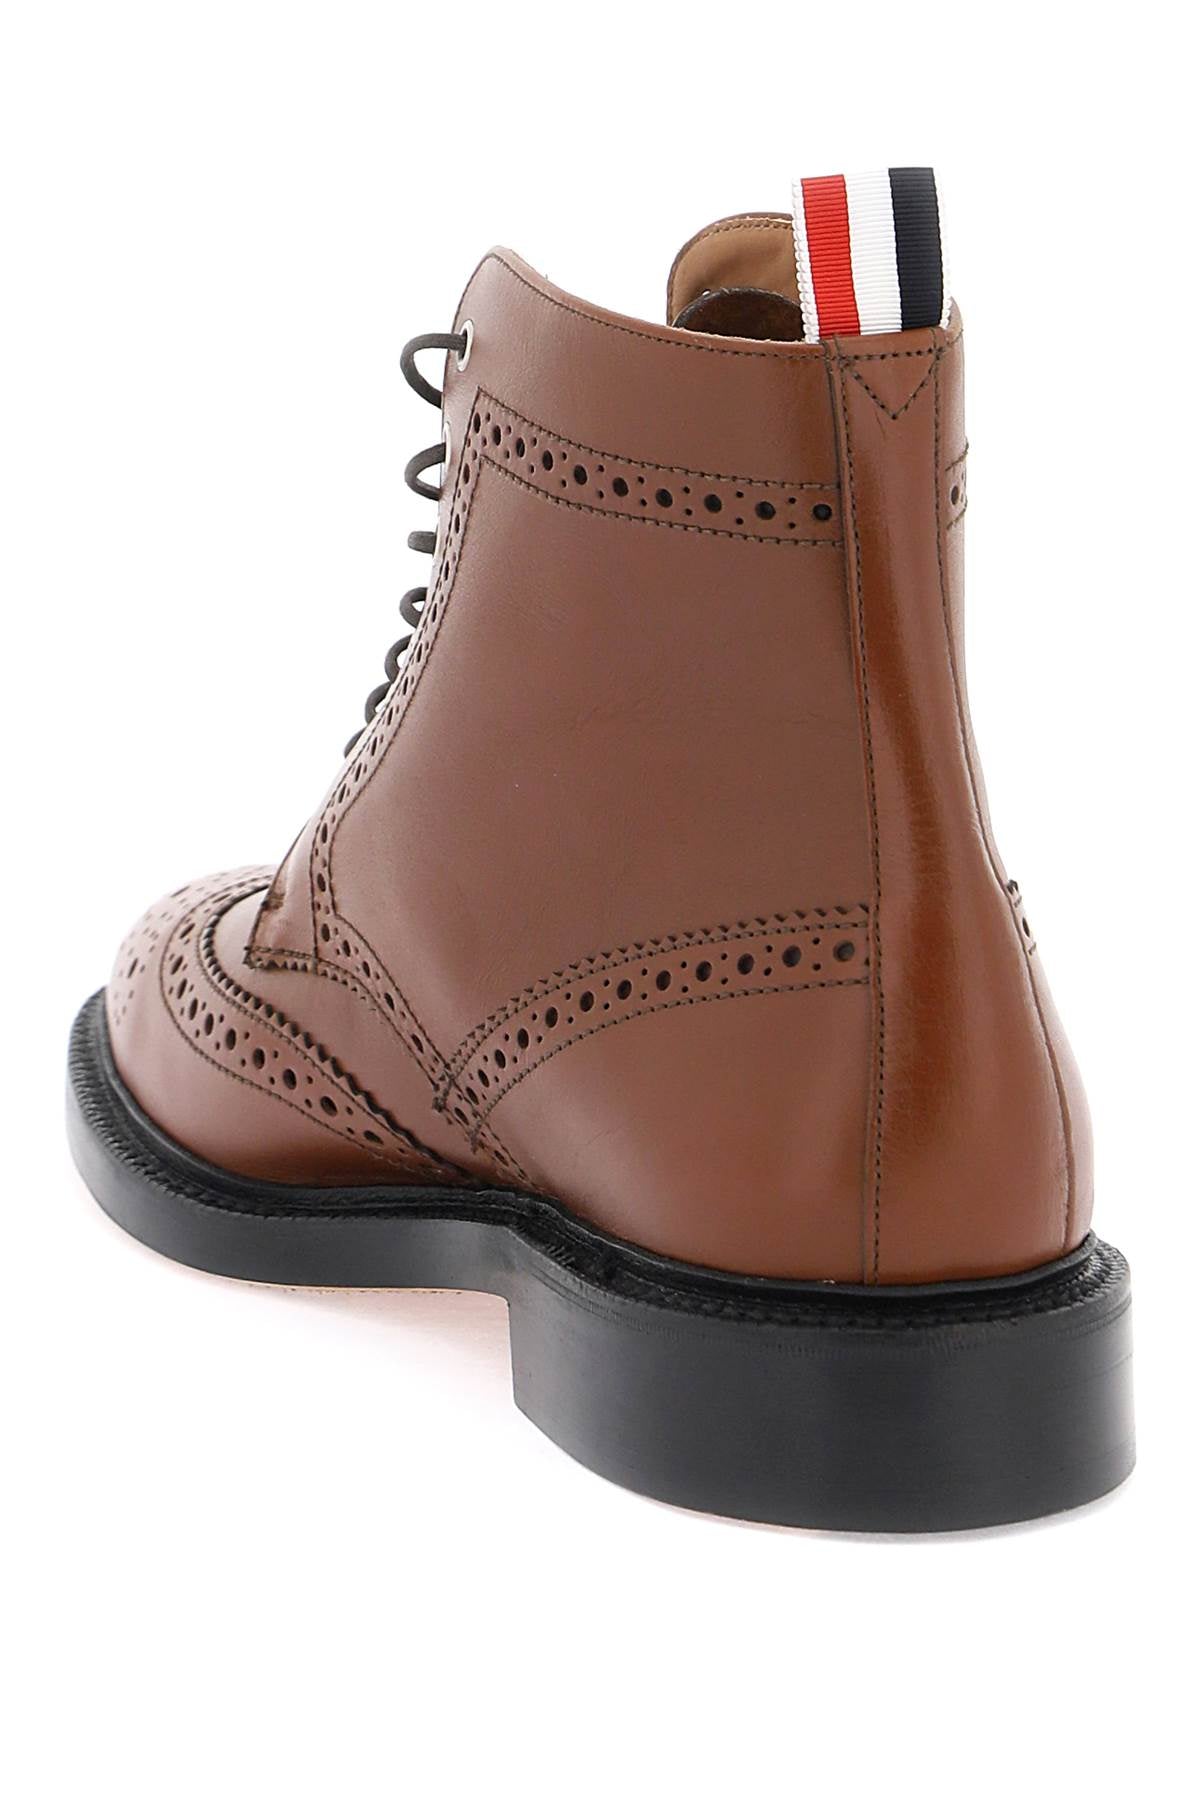 Thom browne wingtip ankle boots with brogue details-2